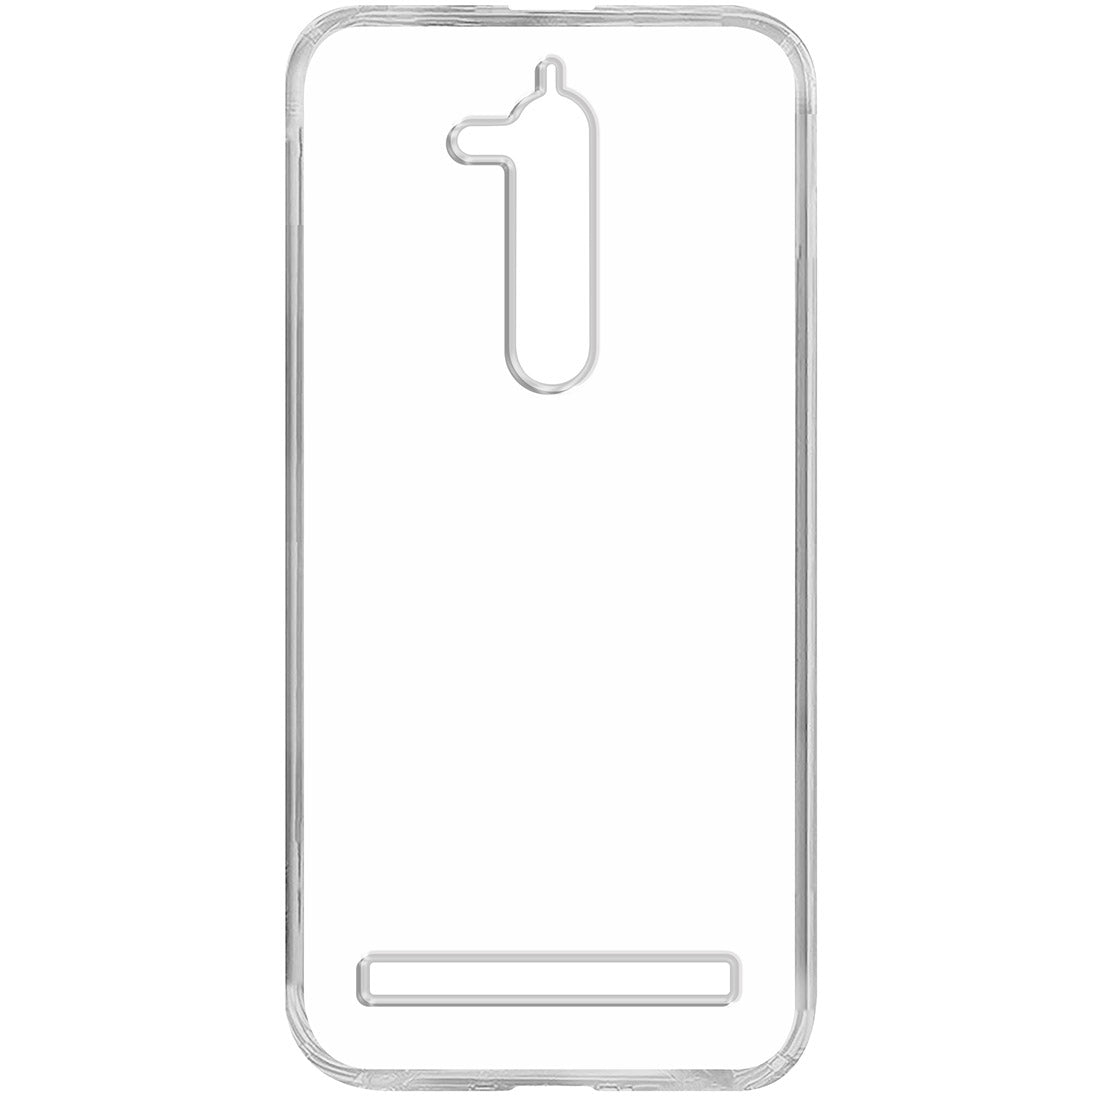 Clear Case for Asus Zenfone Go ZB500KL